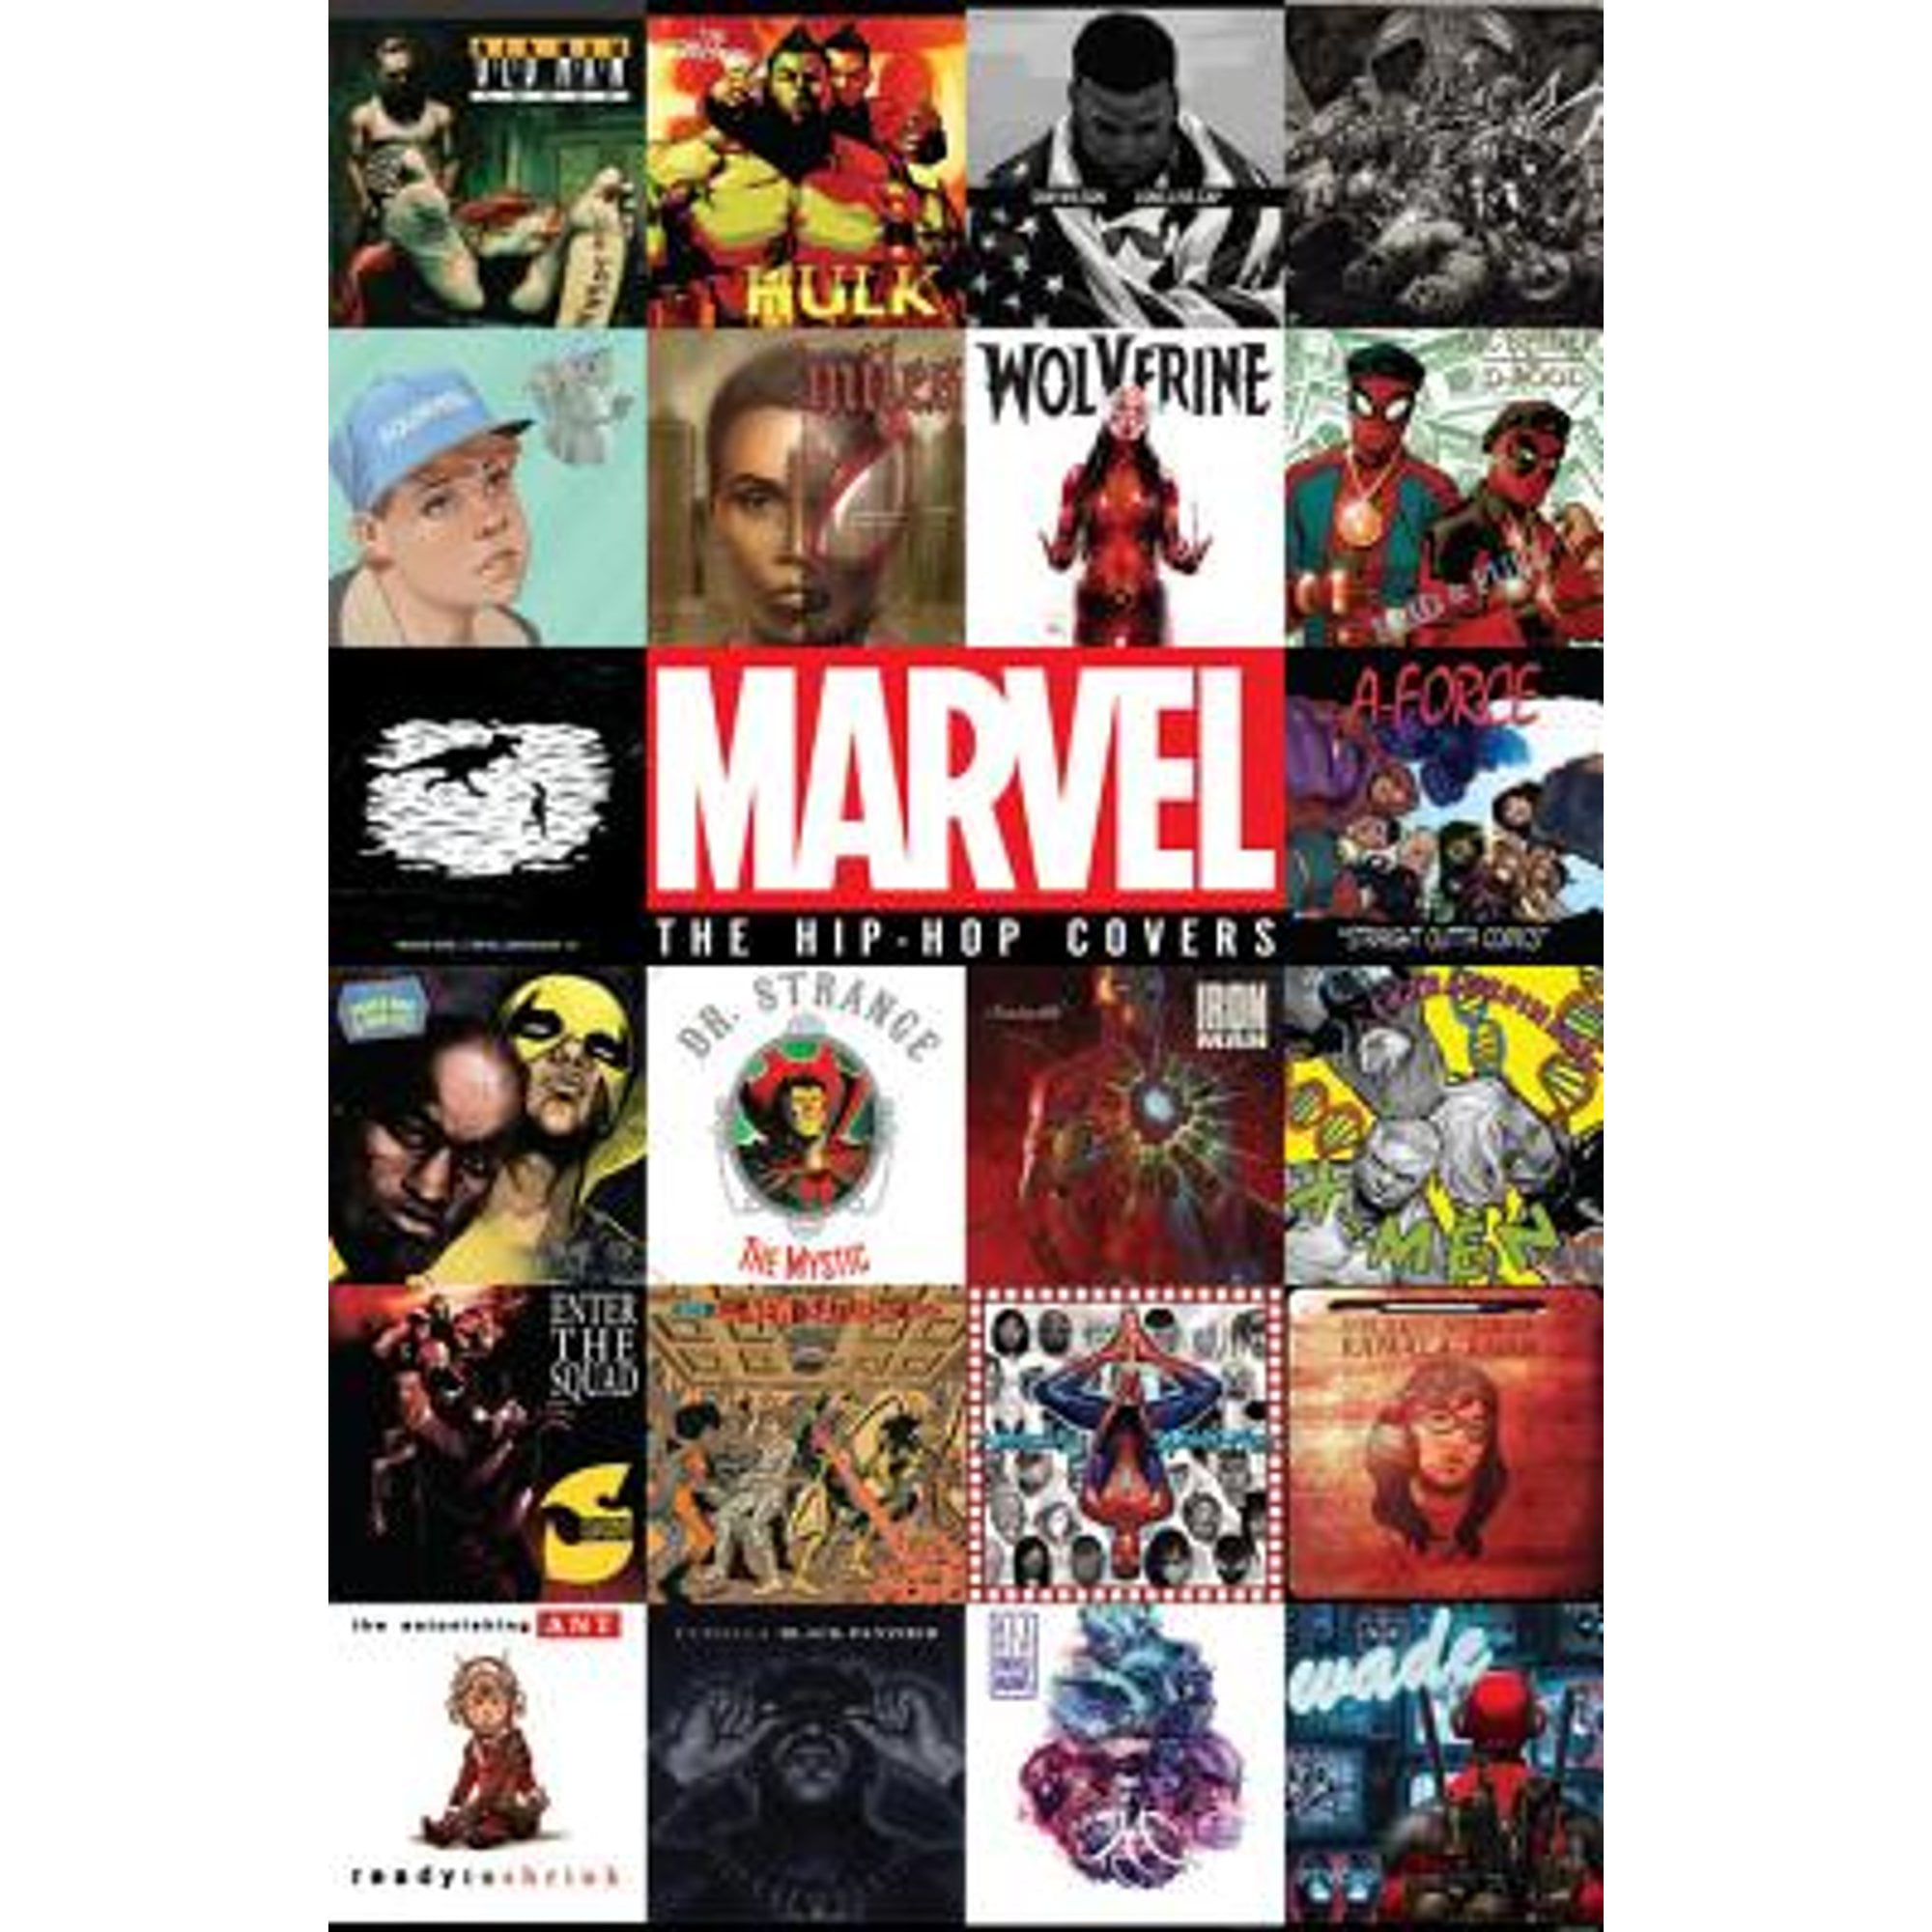 Pre-Owned Marvel: The Hip-Hop Covers, Volume 1 (Hardcover 9781302902339) by Marvel Comics